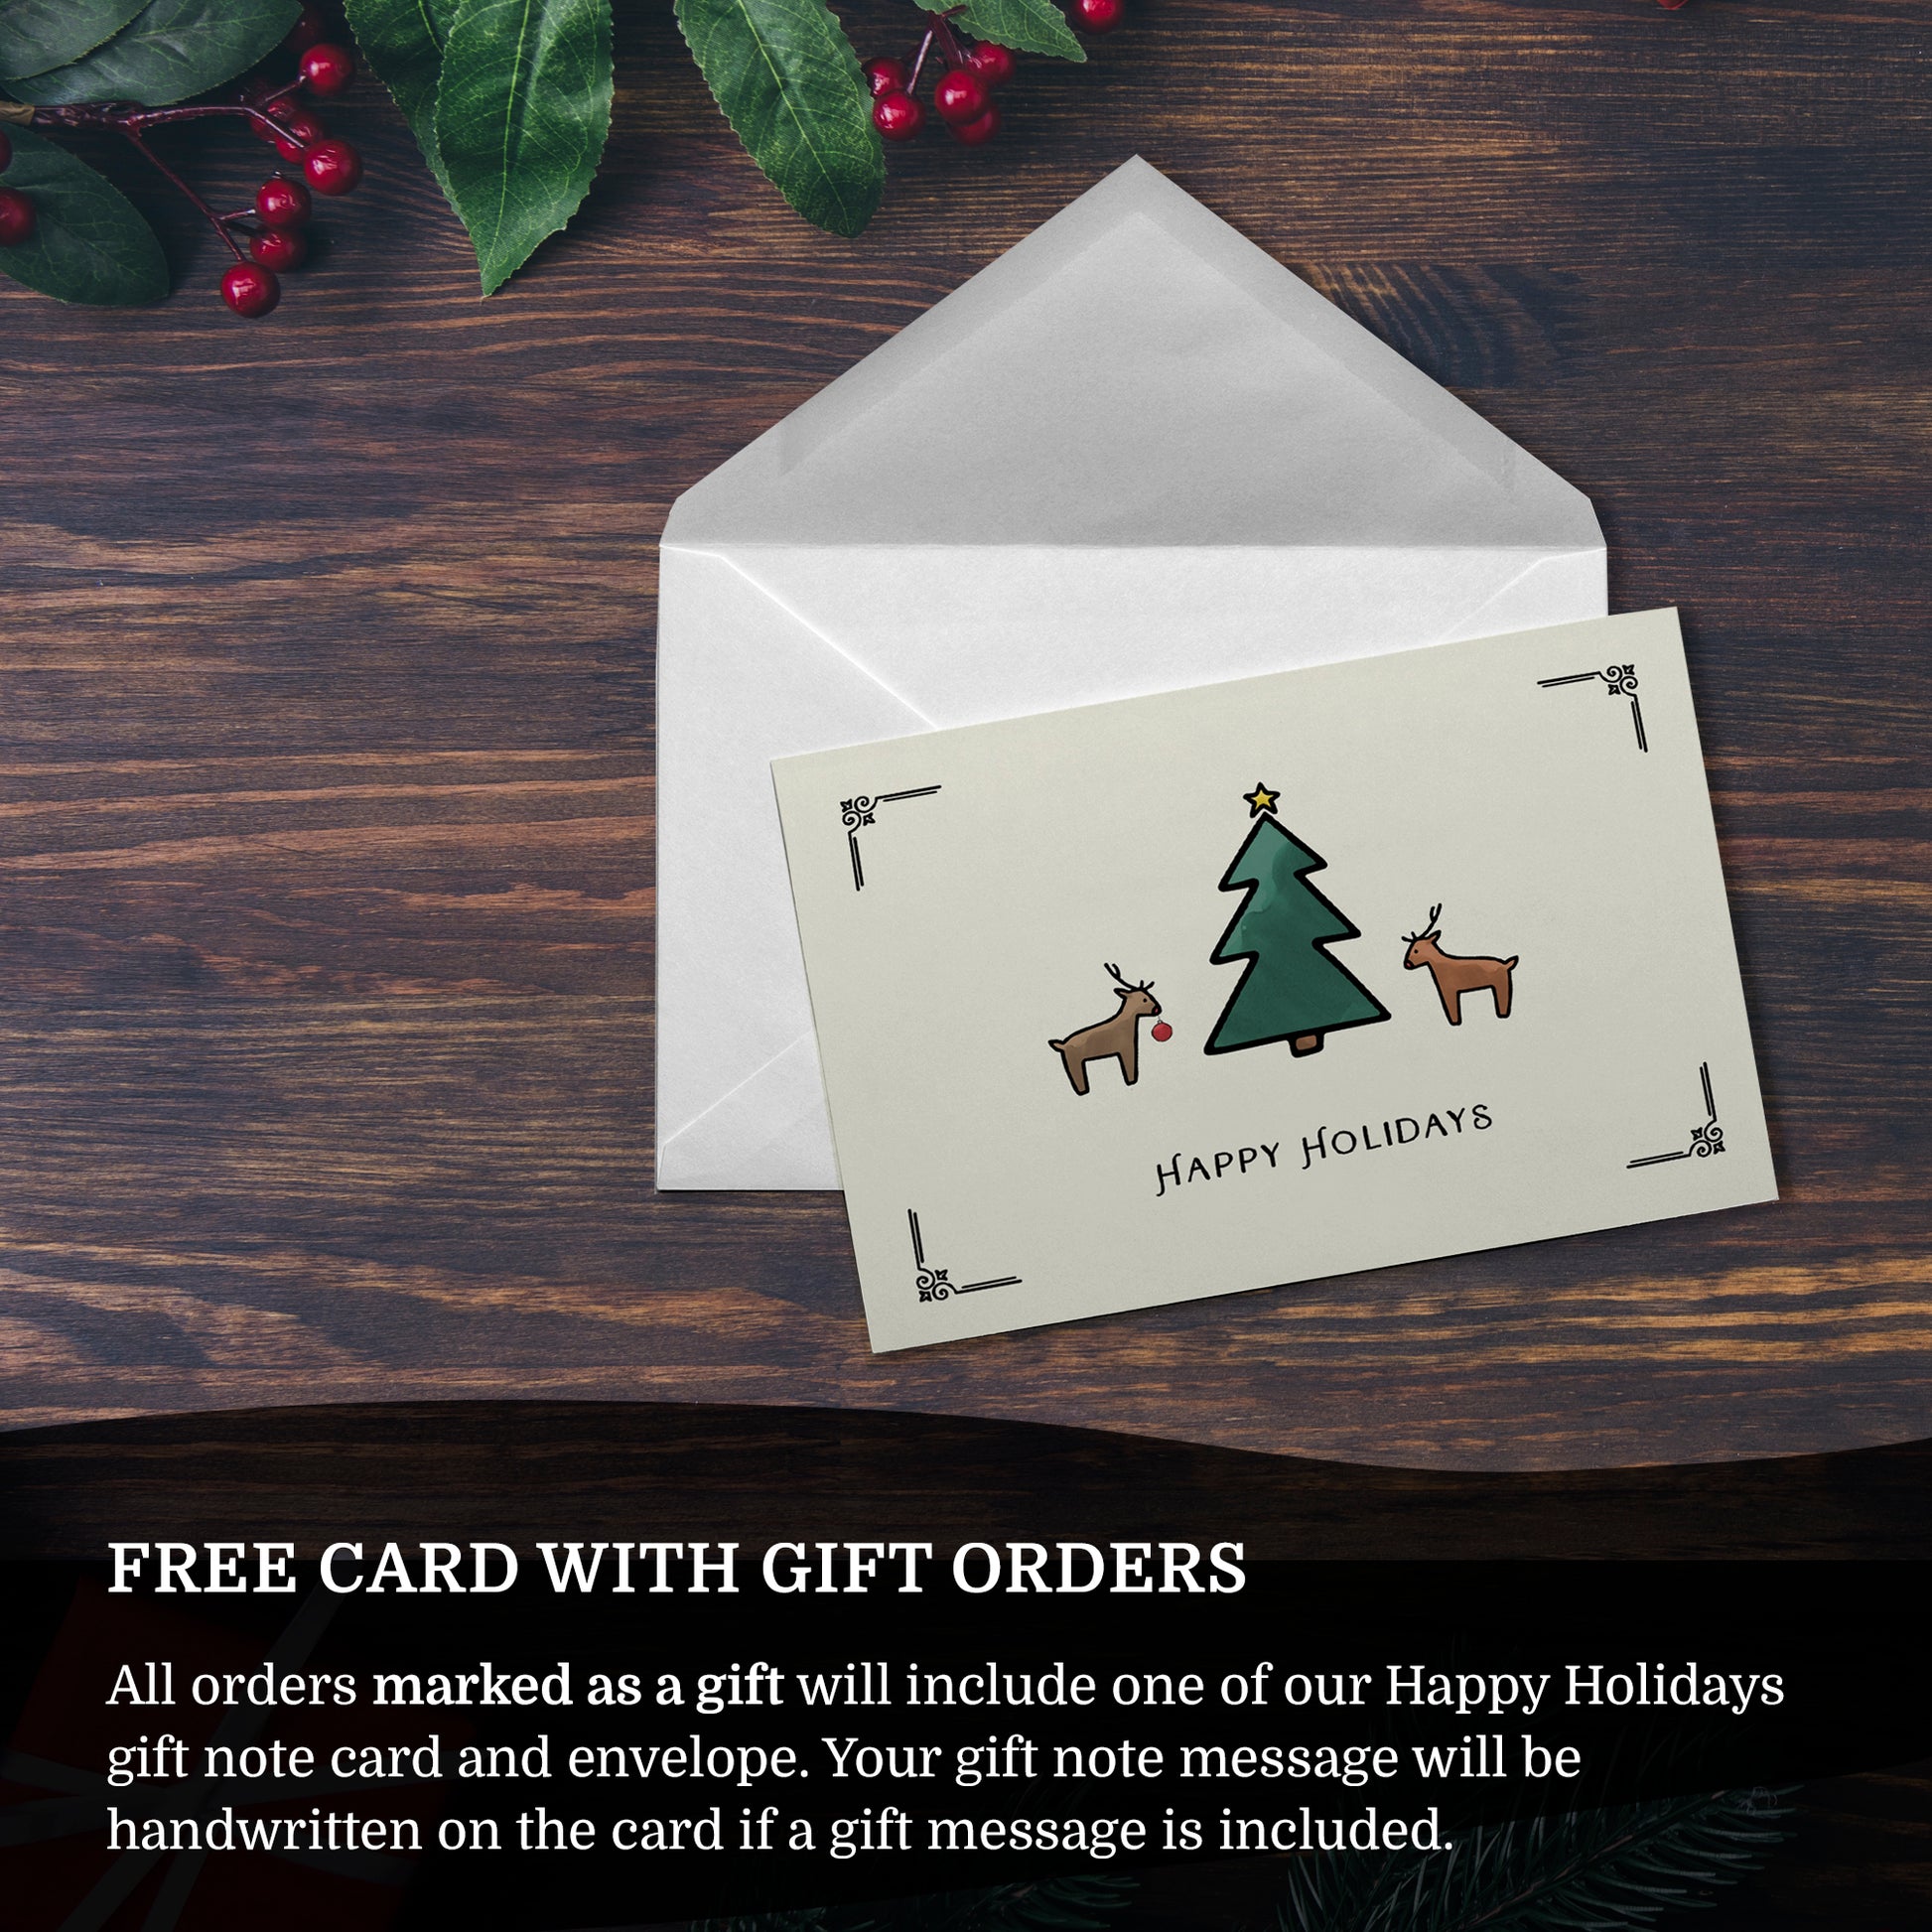 free card with ornament gift orders